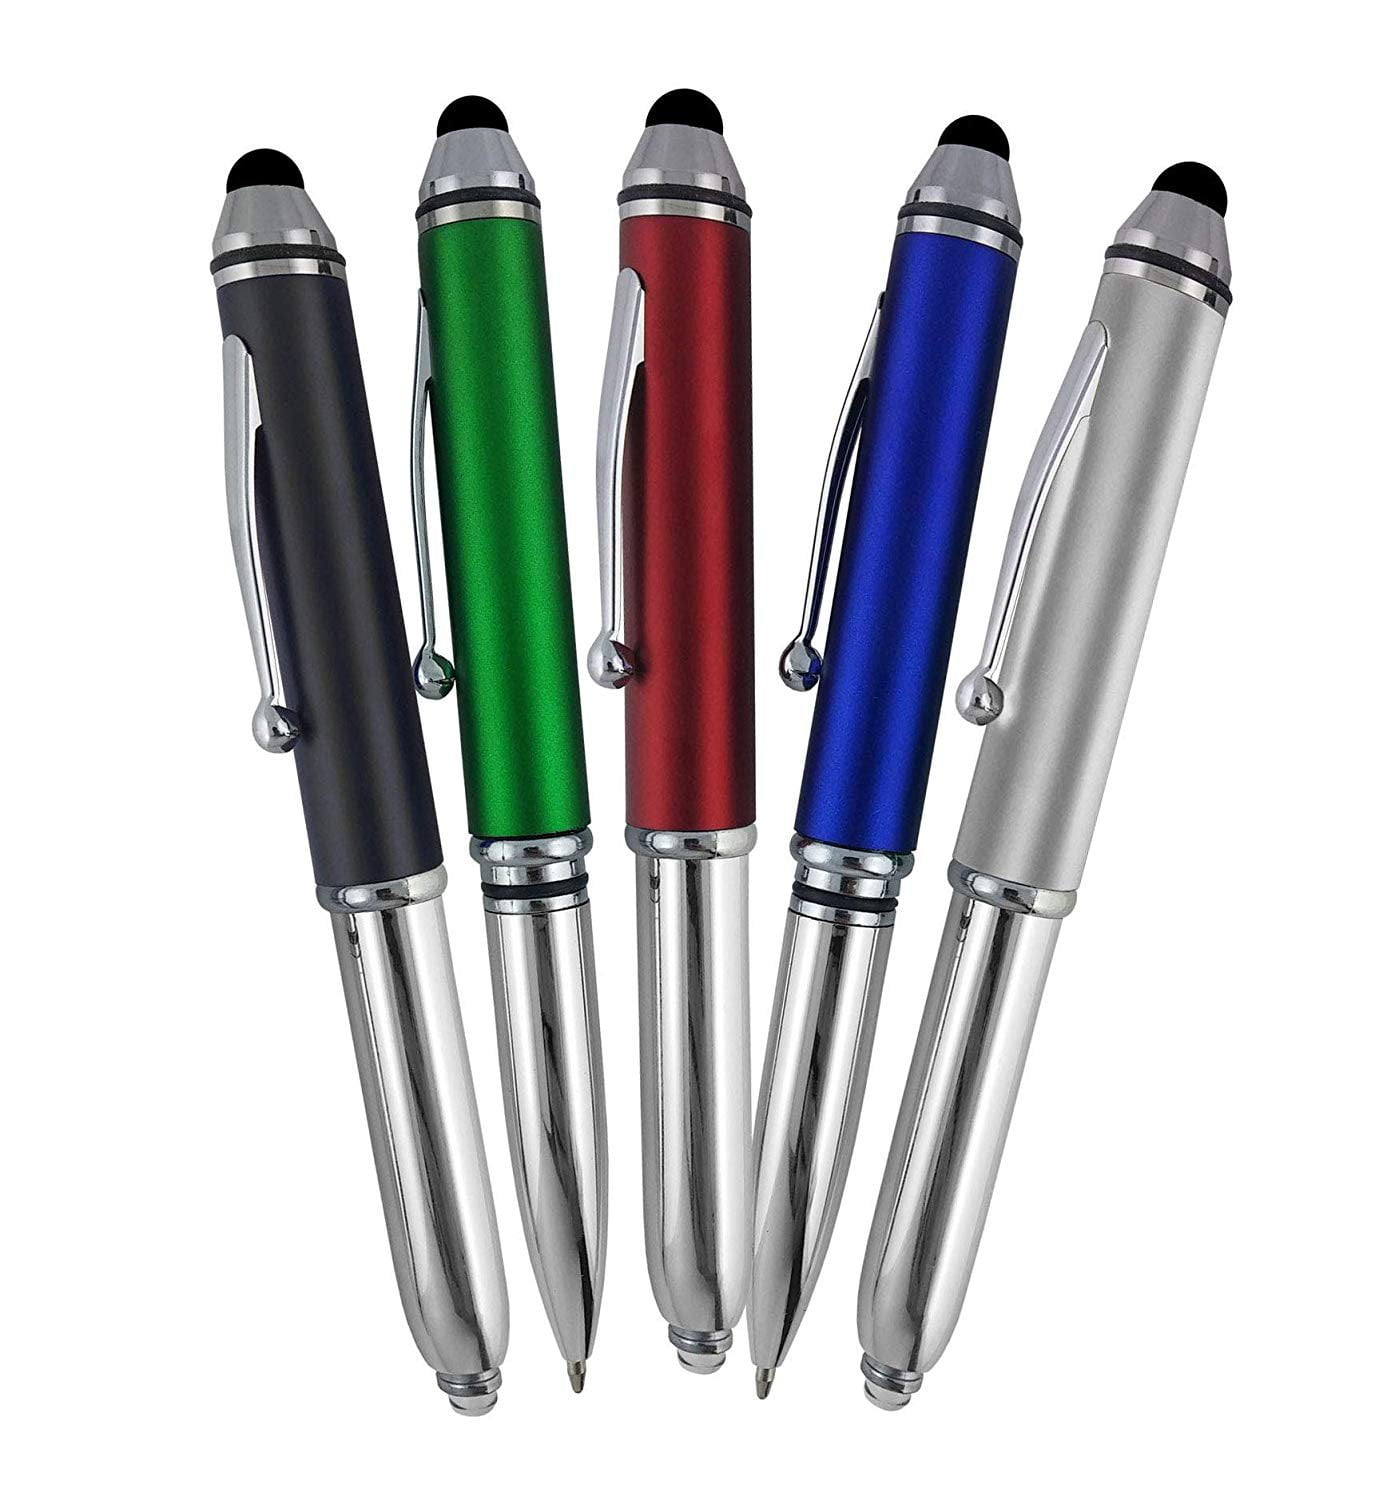 Ballpoint Pens 3 In 1 LED Light Tablet Stylus Stationery Capacitive Touch Screen 